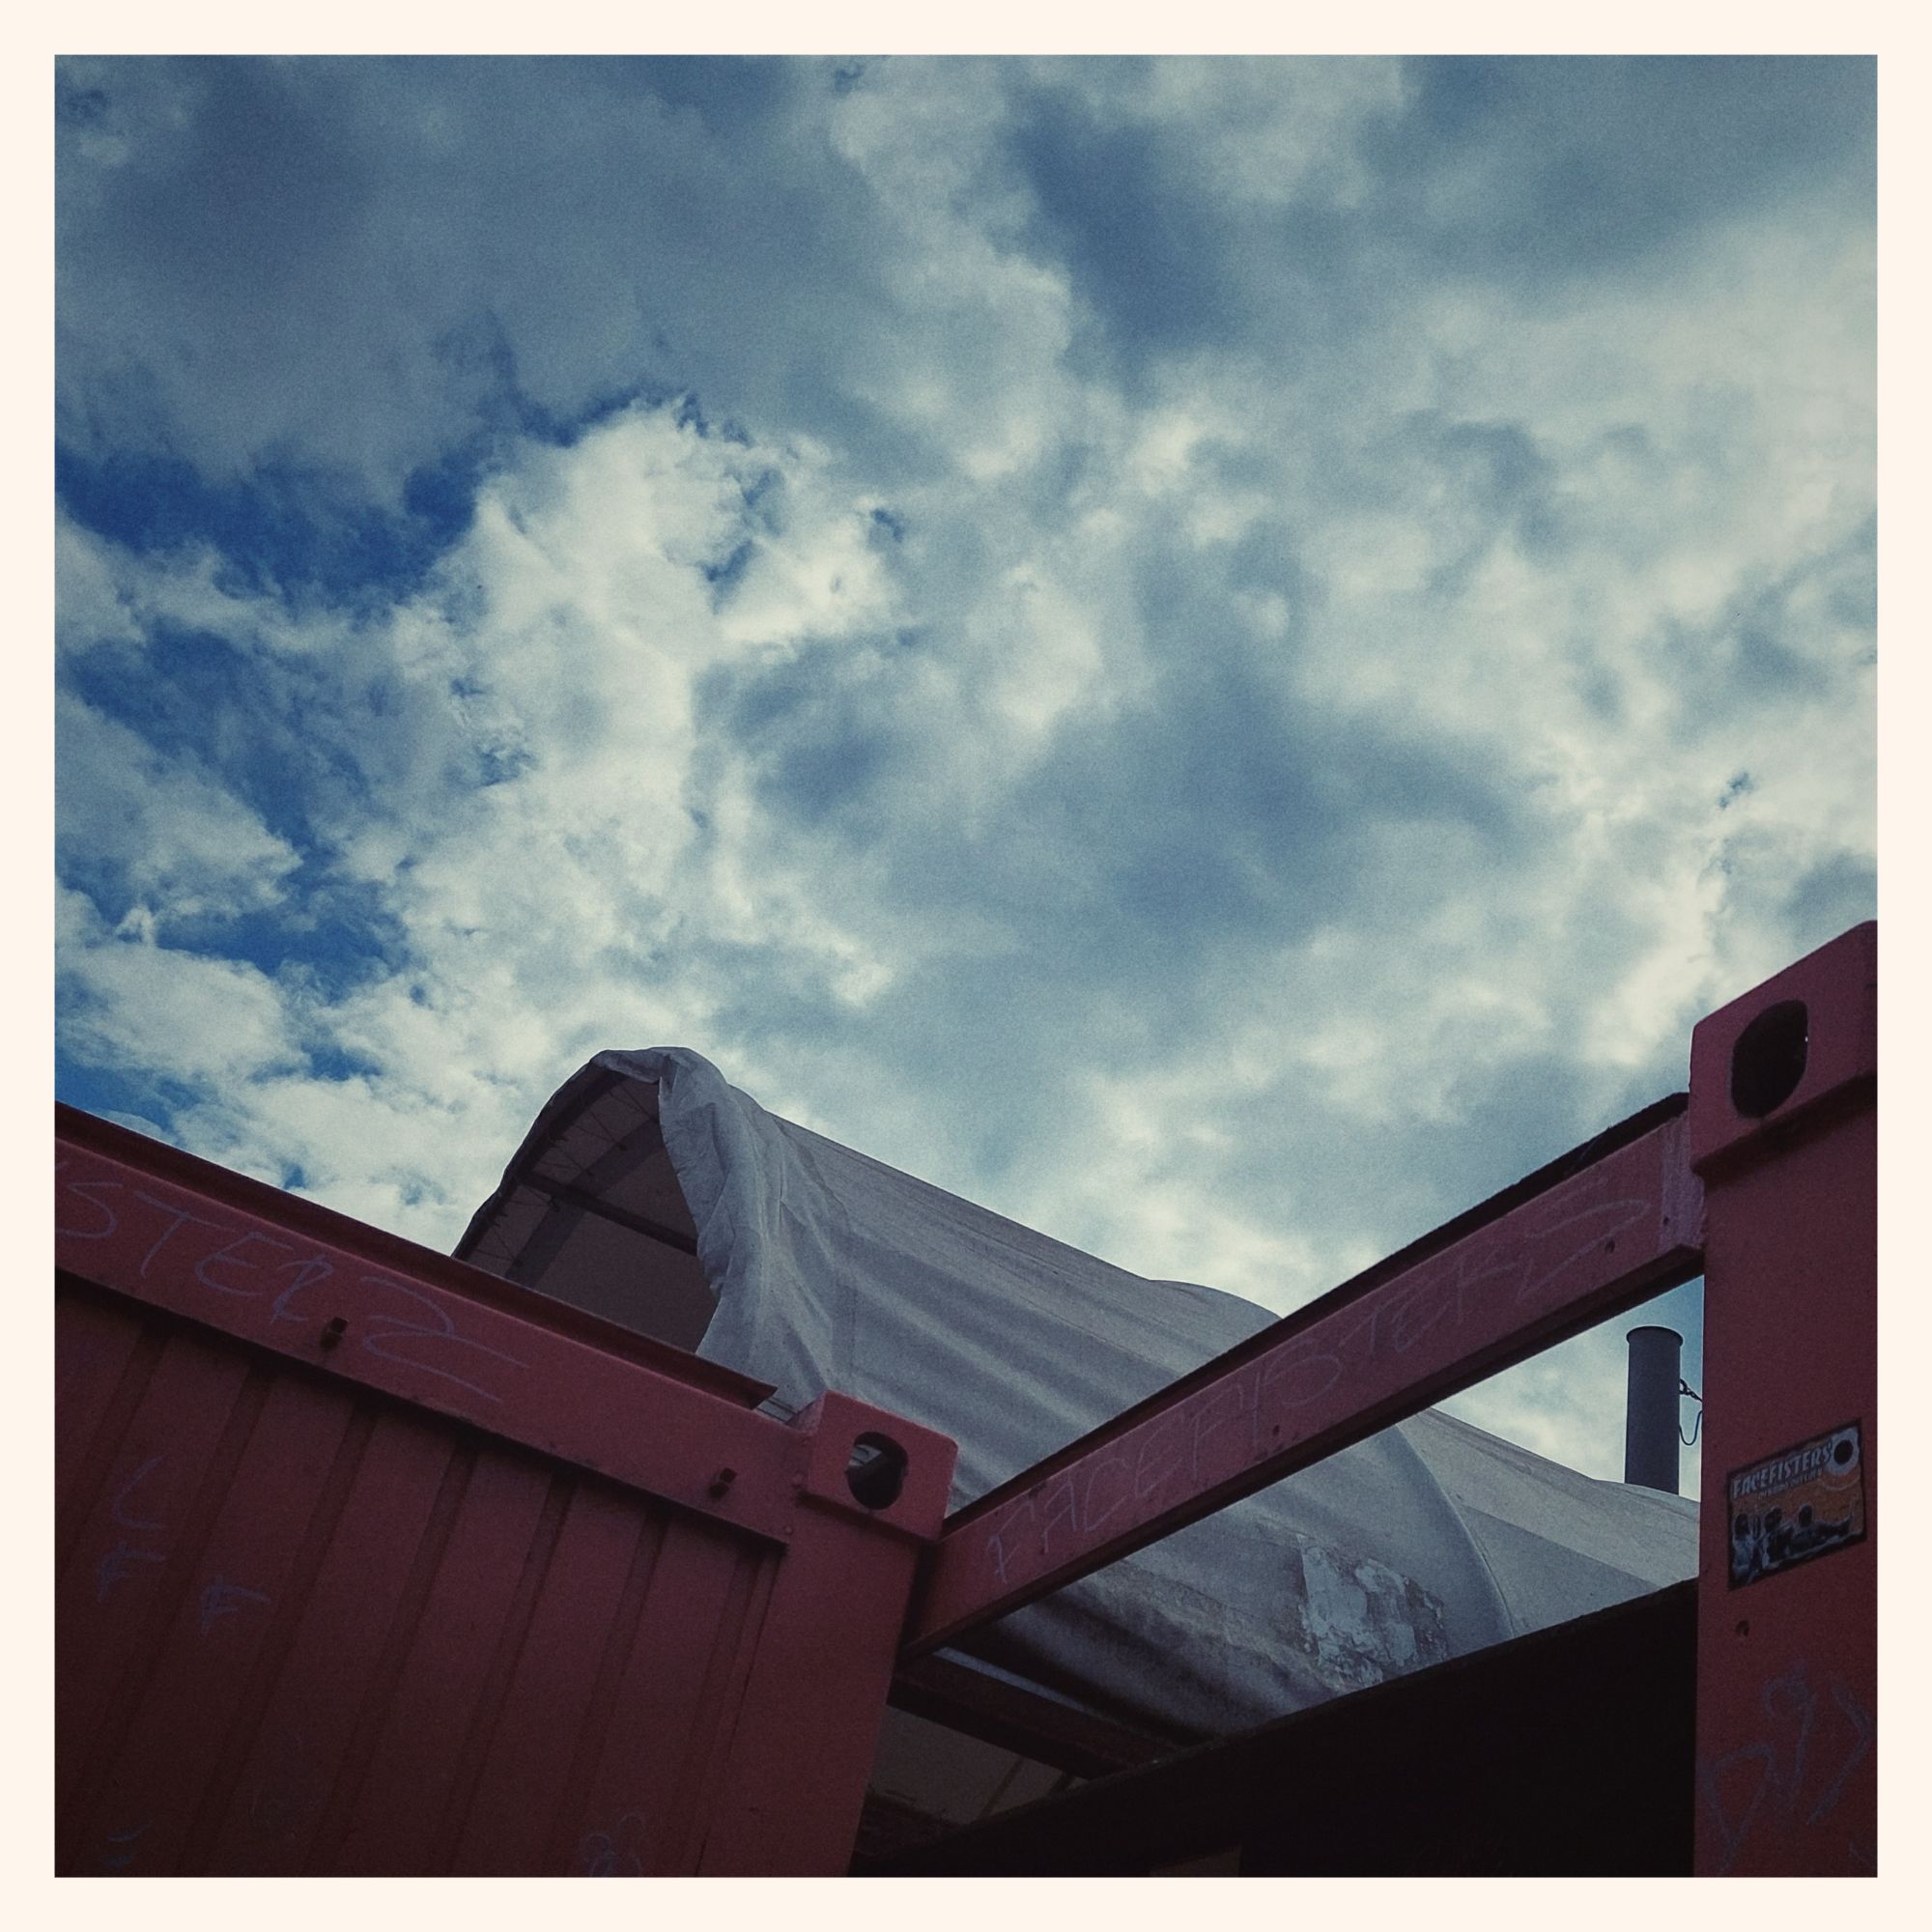 Troubled sky above a roof of tent fabric and steel girders.